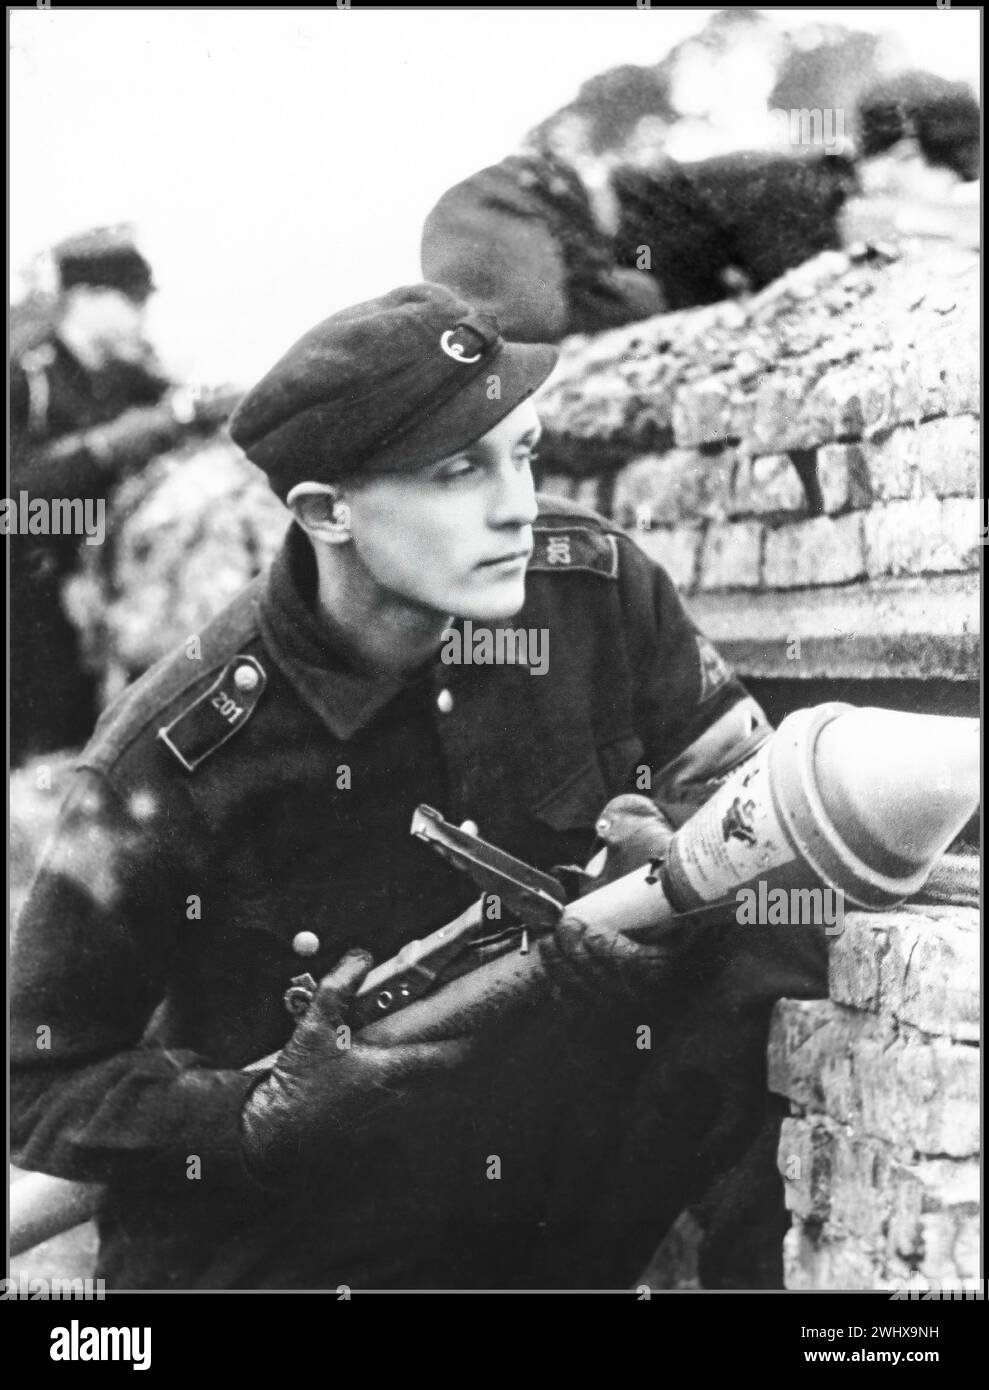 WW2 1945 Berlin VOLKSSTURM peoples army. Adolf Hitlers last gasp defence of Berlin. Uniformed youth holding an anti tank PANZERFAUST weapon to vigorously and bravely defend Nazi Germany against the advancing British Soviet and American forces. 1945 World War II Second World War Berlin Nazi Germany Stock Photo